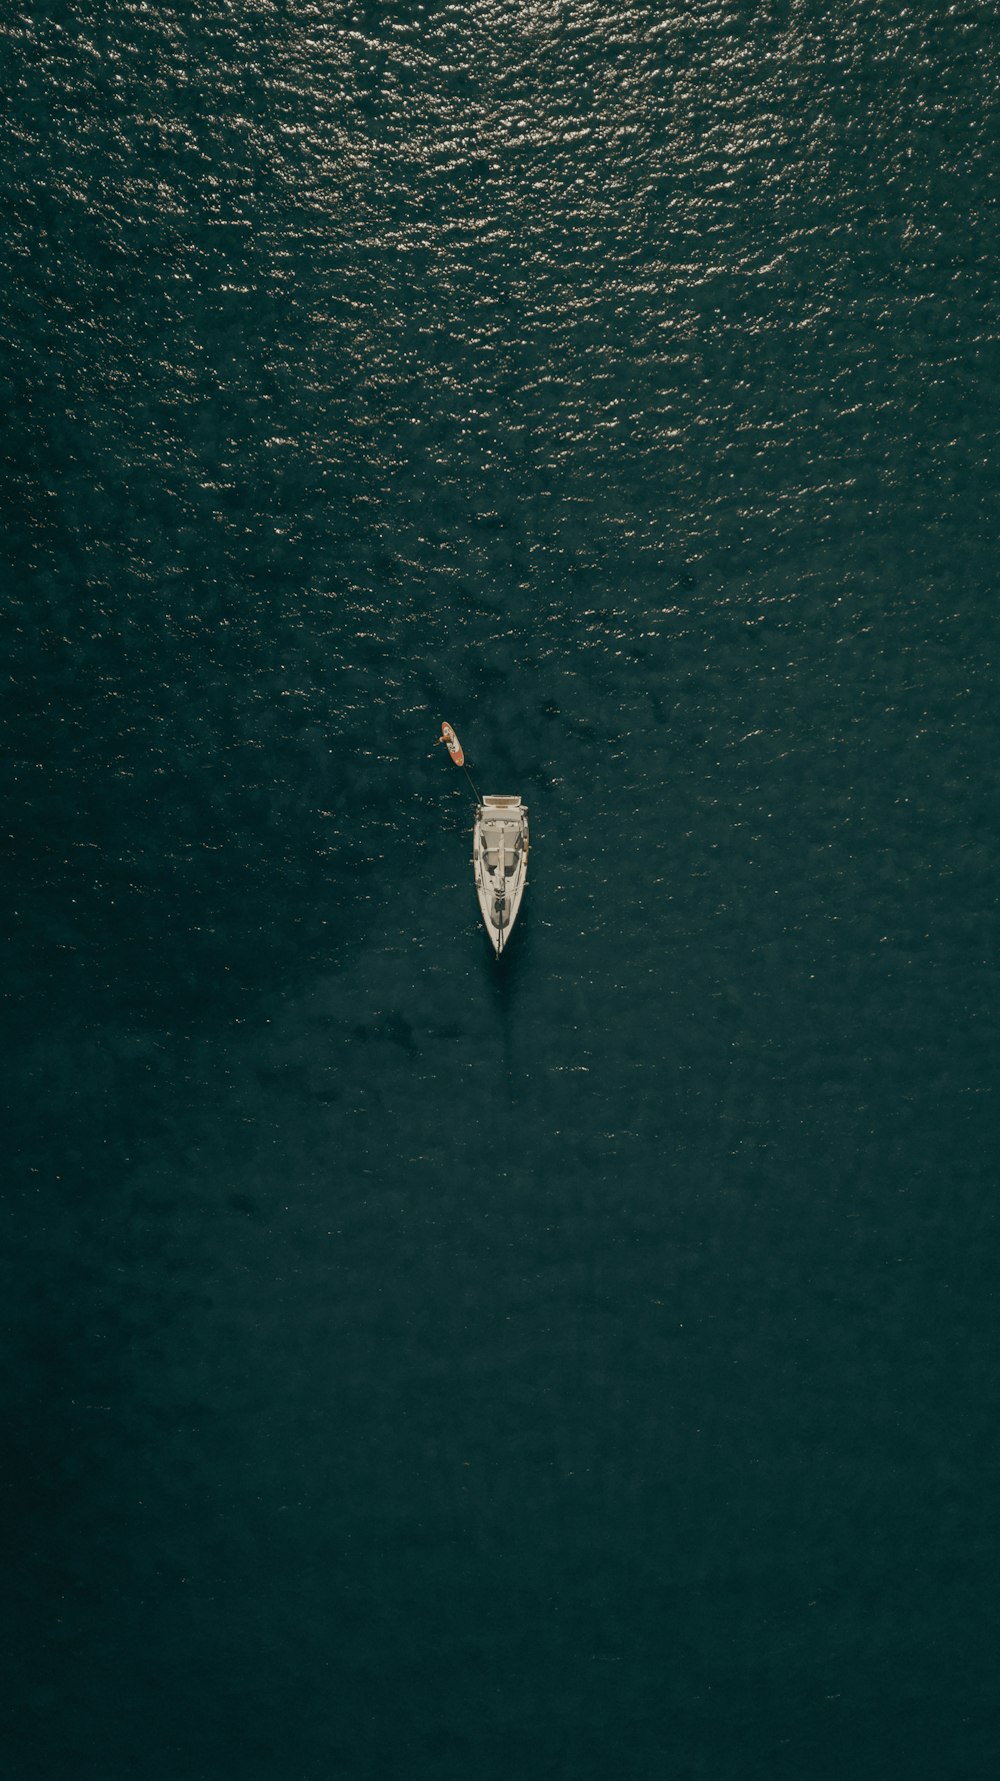 aerial view of person in white shirt riding on white boat on water during daytime